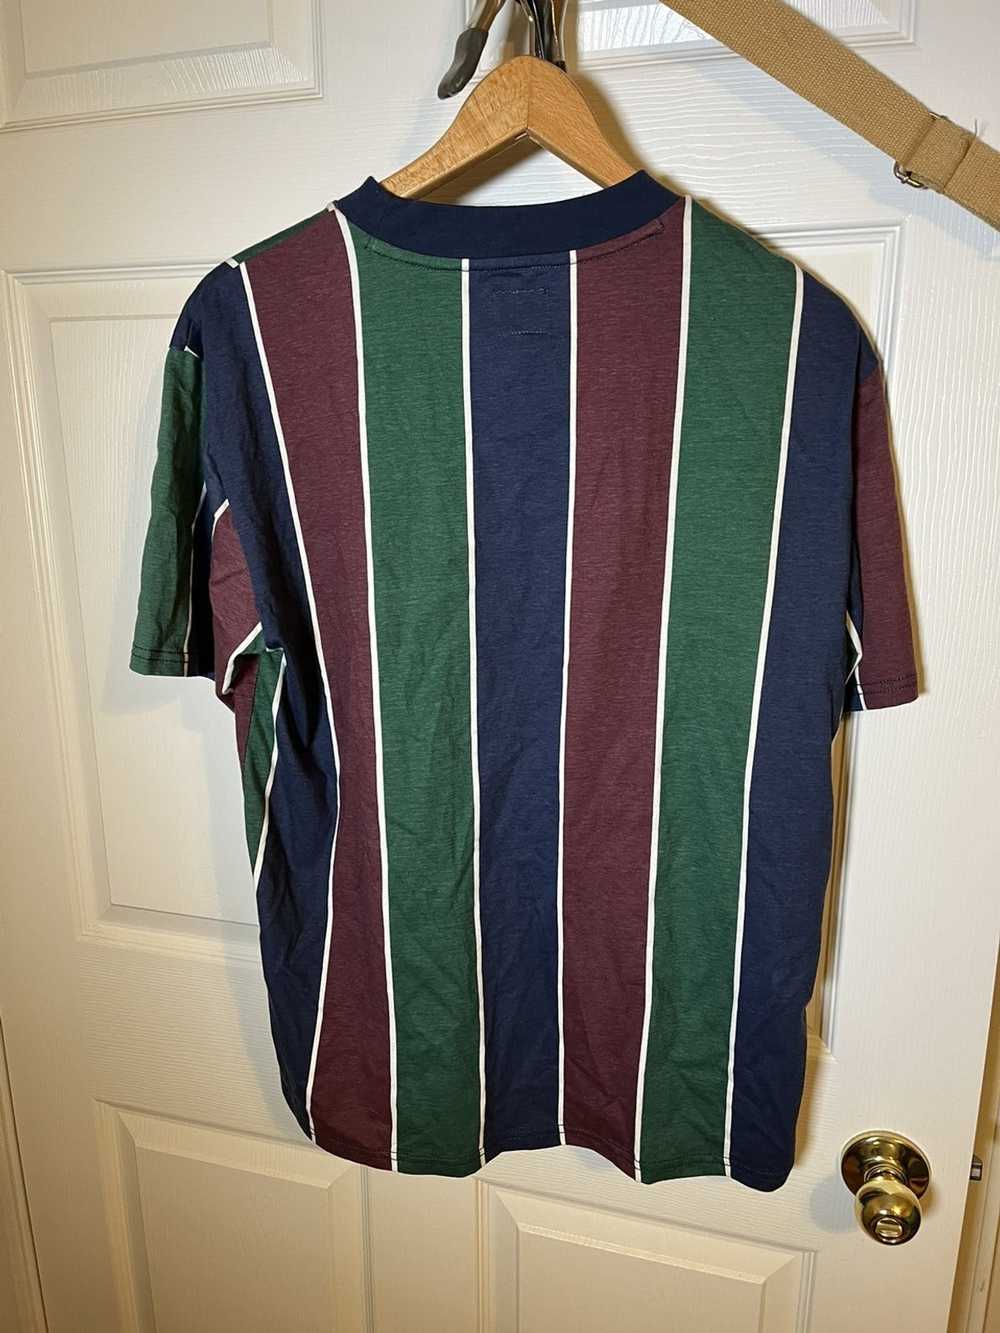 Guess Surfer stripe burgundy, navy, and green - image 3